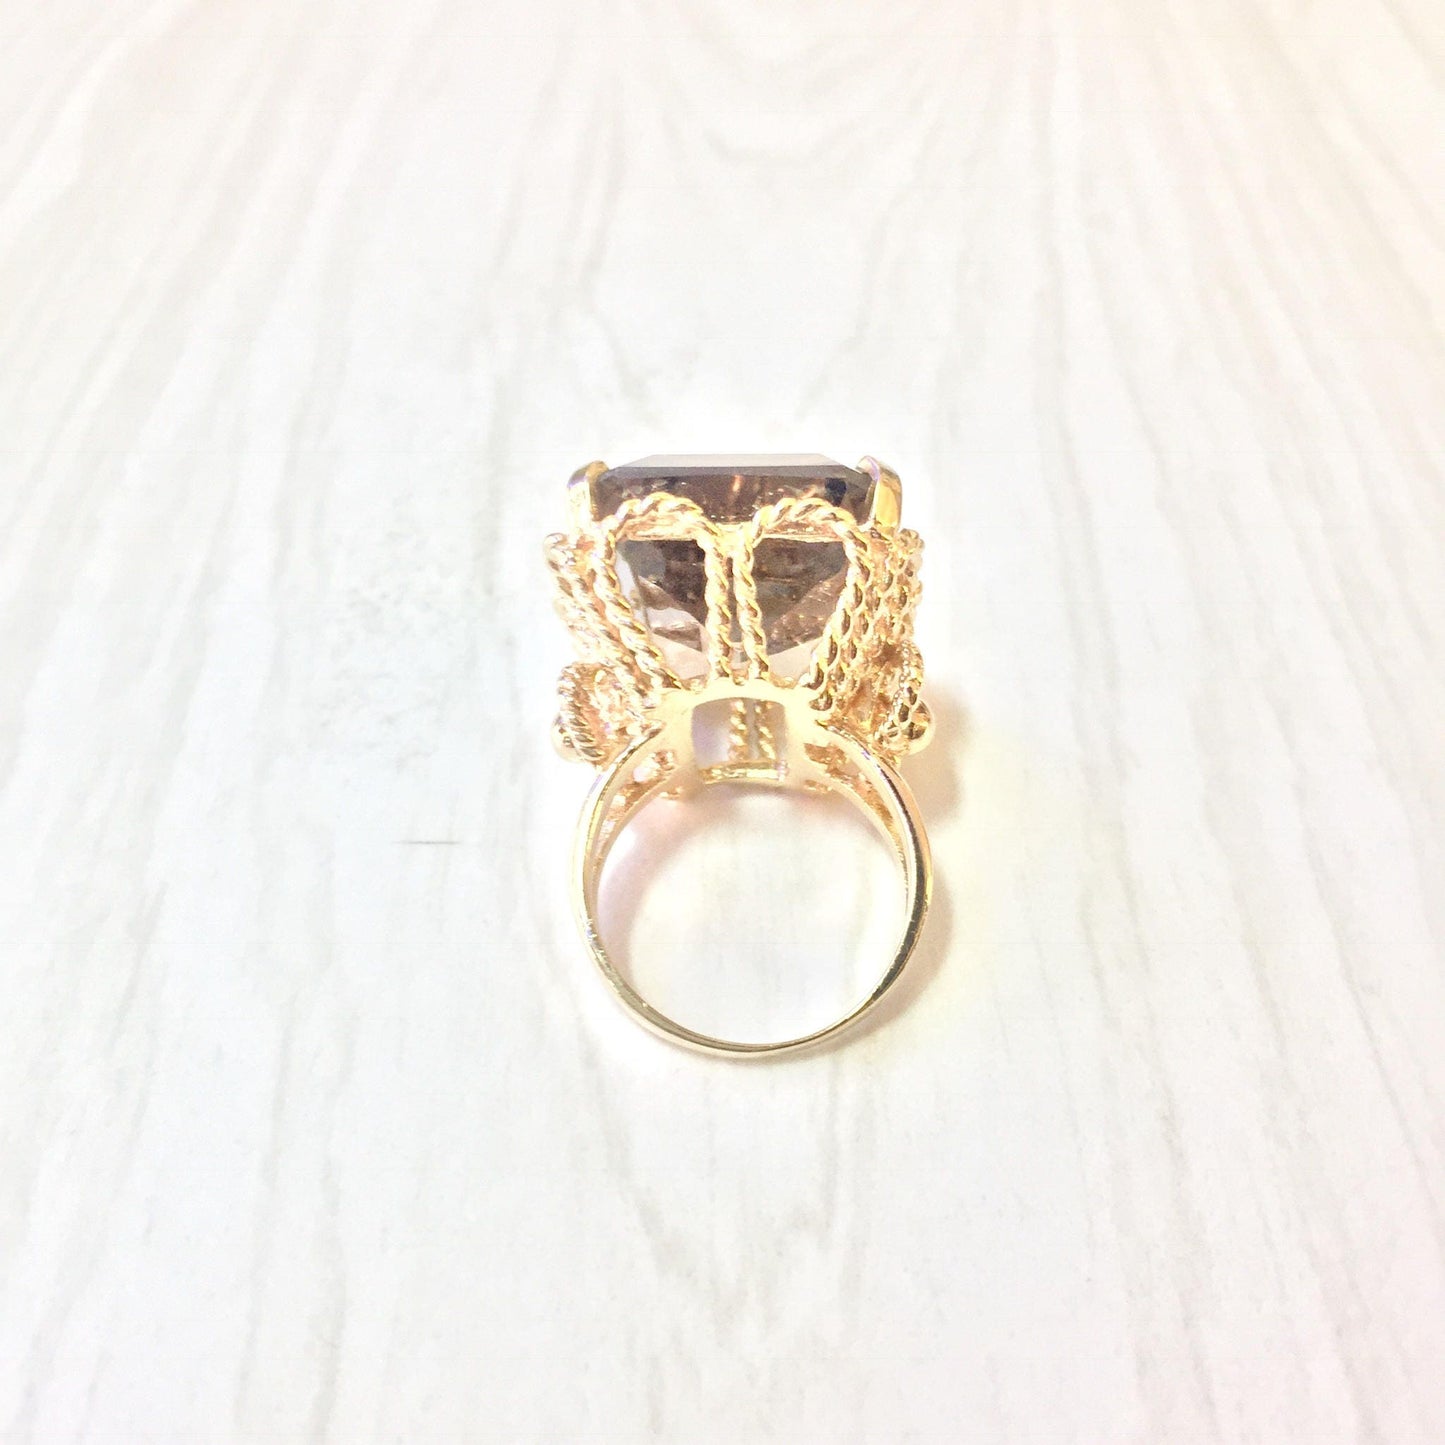 14K yellow gold smoky quartz cocktail ring with ornate setting and emerald cut center stone, statement jewelry piece